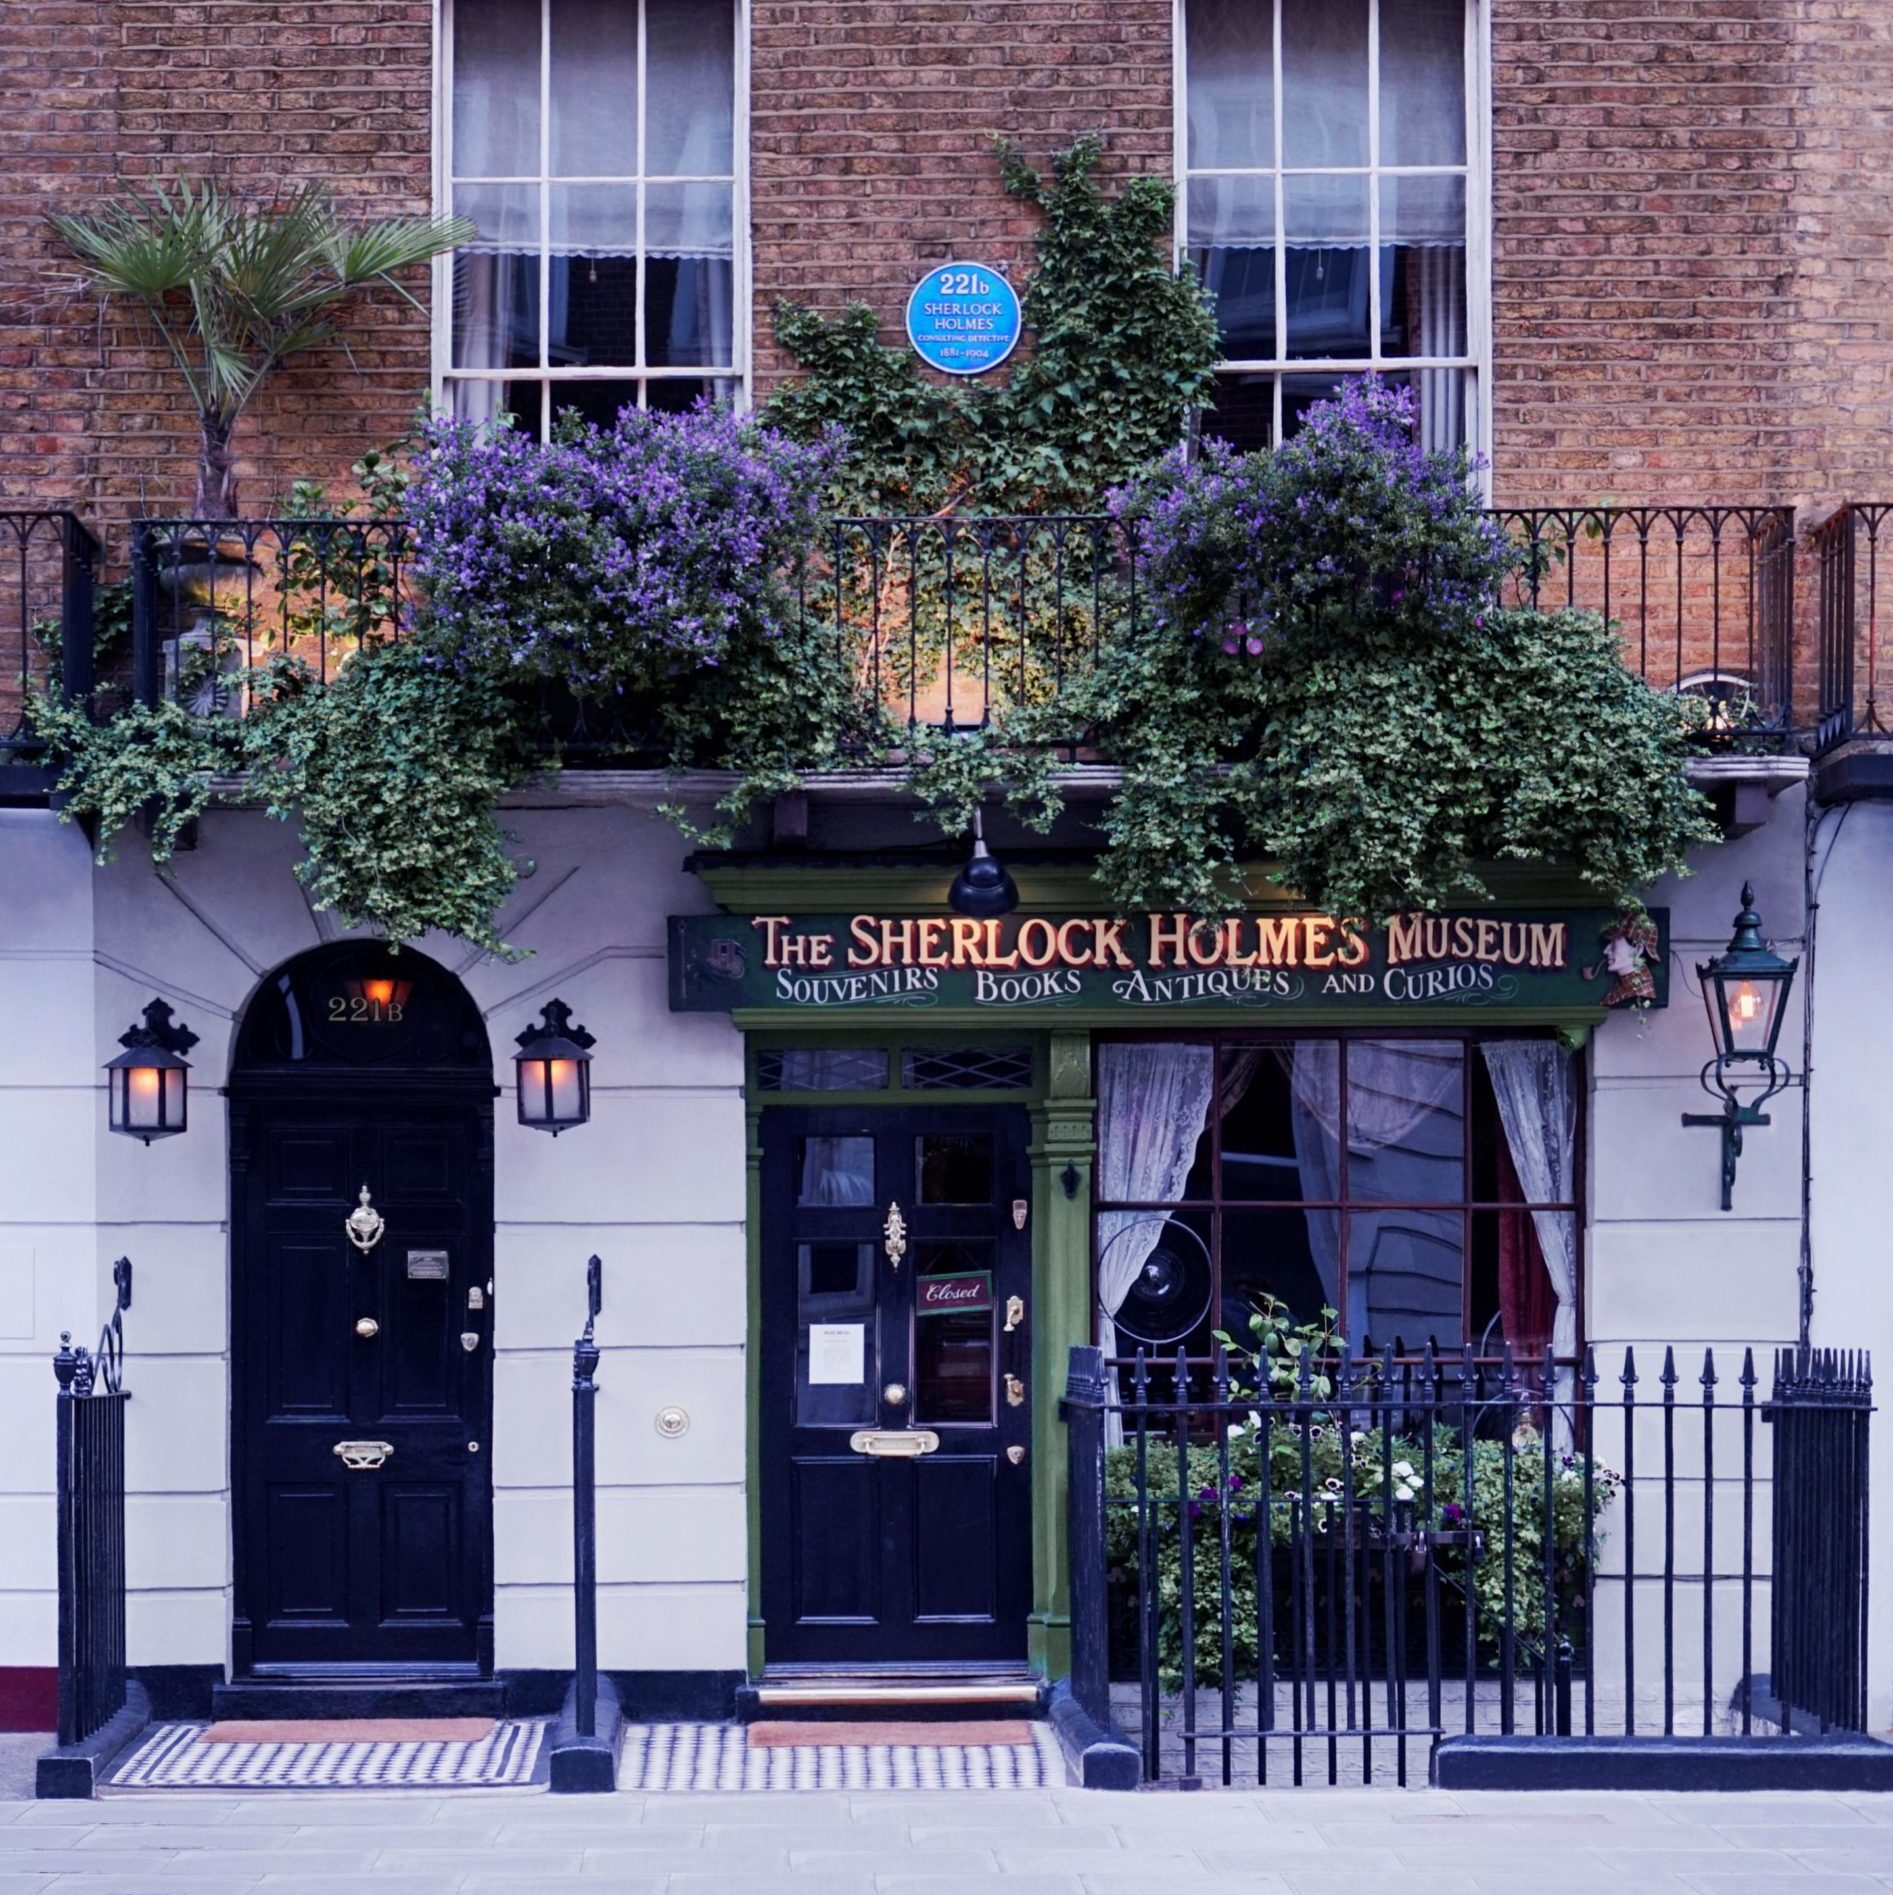 Sherlock Holmes Museum - The official home of Sherlock Holmes